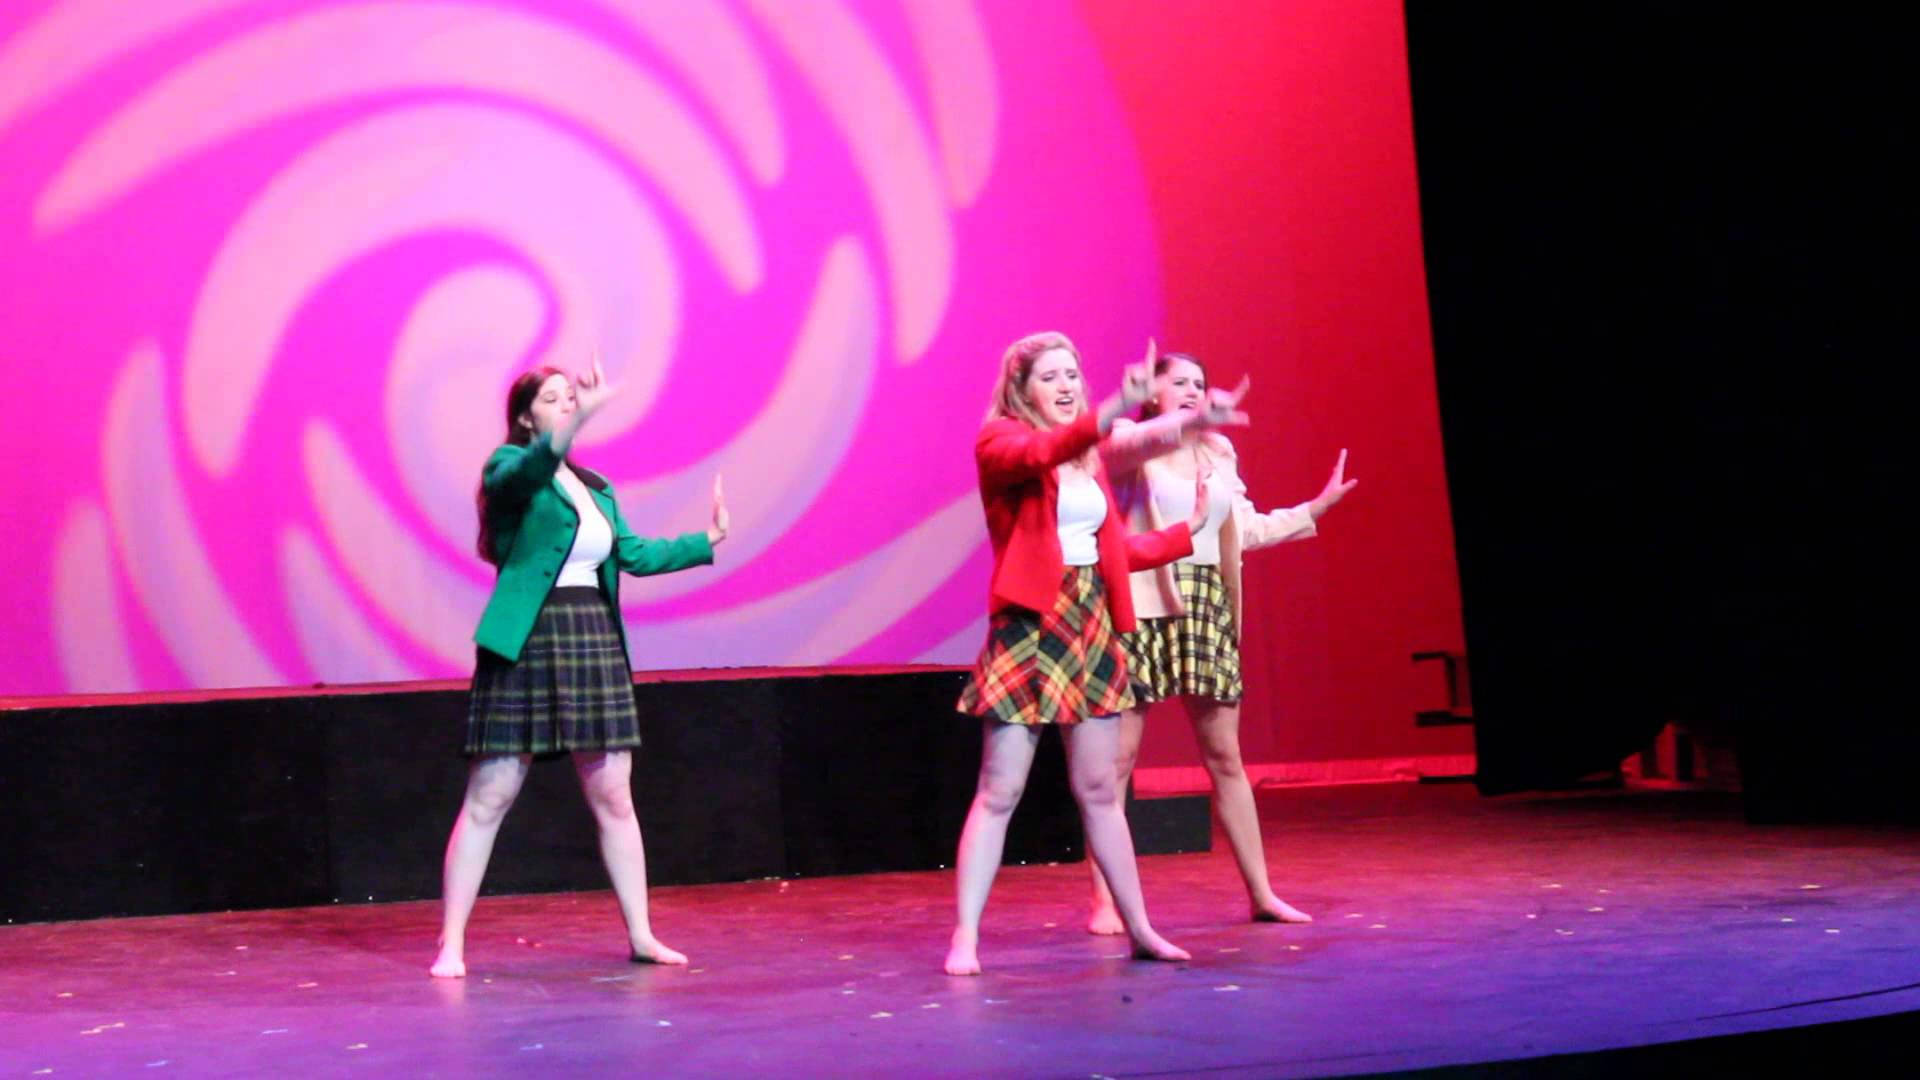 Heathers Performing On Stage Wallpaper